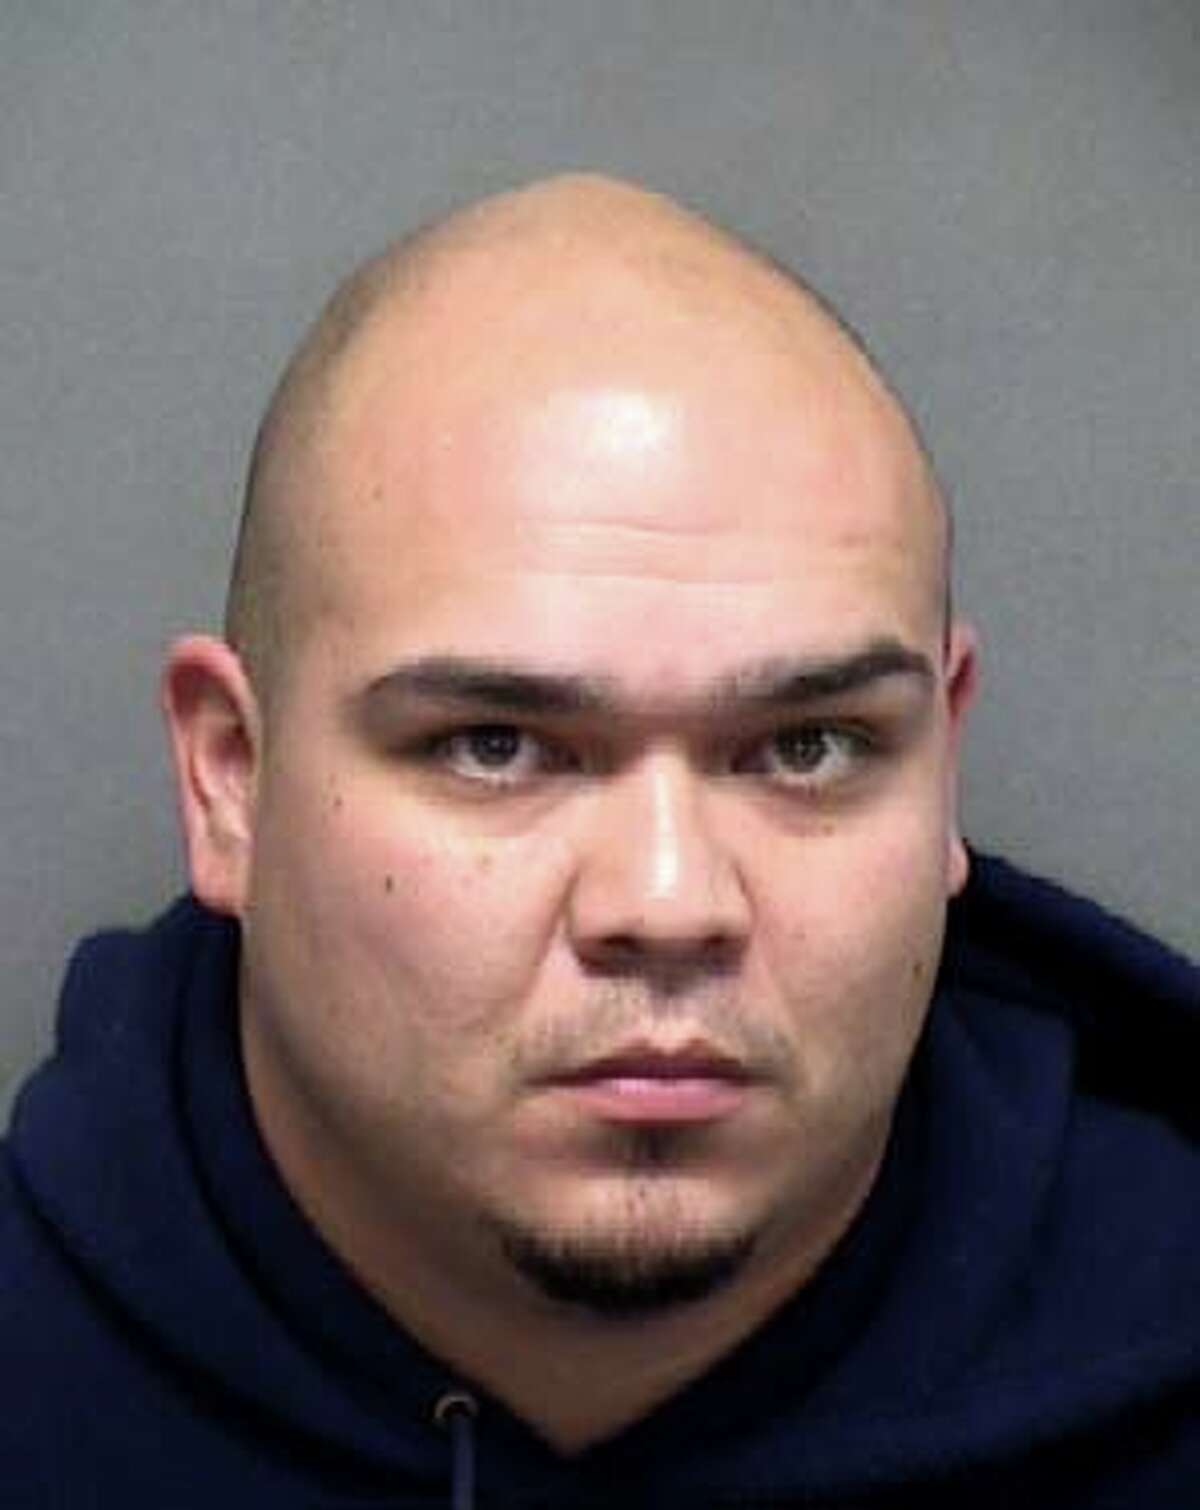 John Paul Garza, 31, seen in a Monday, Dec. 28, 2020 booking photo provided Dec. 28 by the Bexar County Sheriff's Office, was charged with continuous violence against family and violation of a protective order for allegedly physically assaulting his girlfriend according to Sheriff Salazar. This is the second time this year Garza has been arrested on family violence charges.